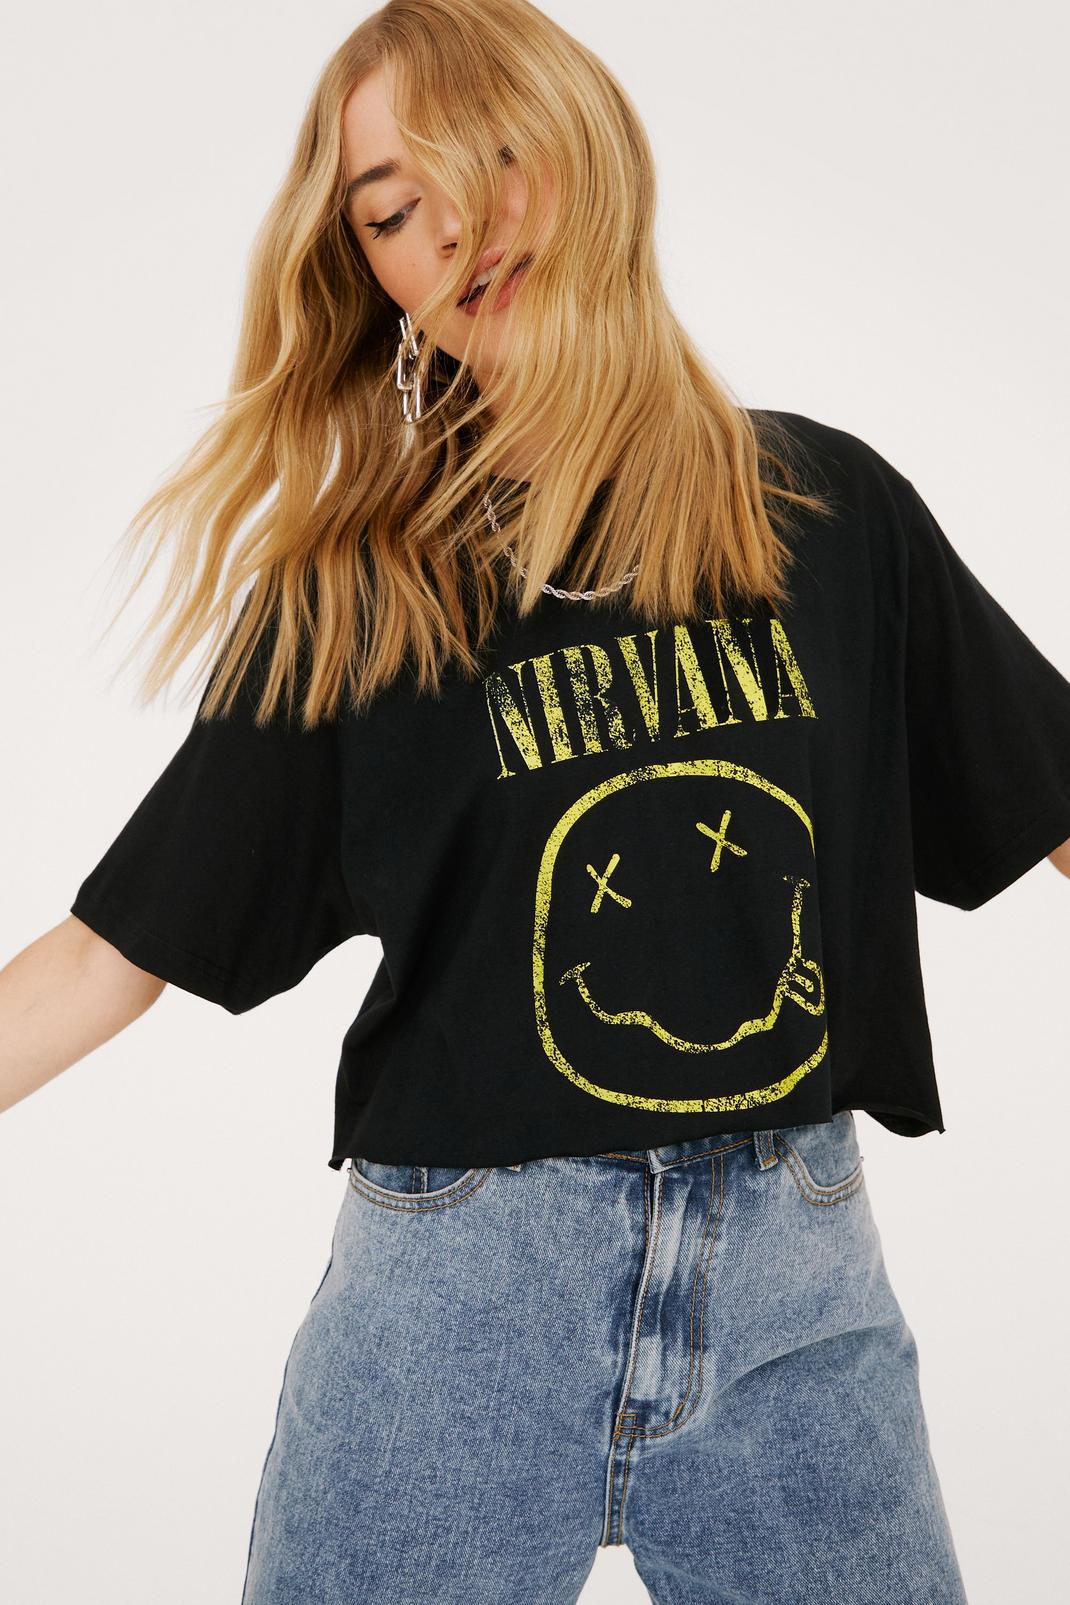 Black Nirvana Smiley Face Cropped Graphic T-Shirt image number 1